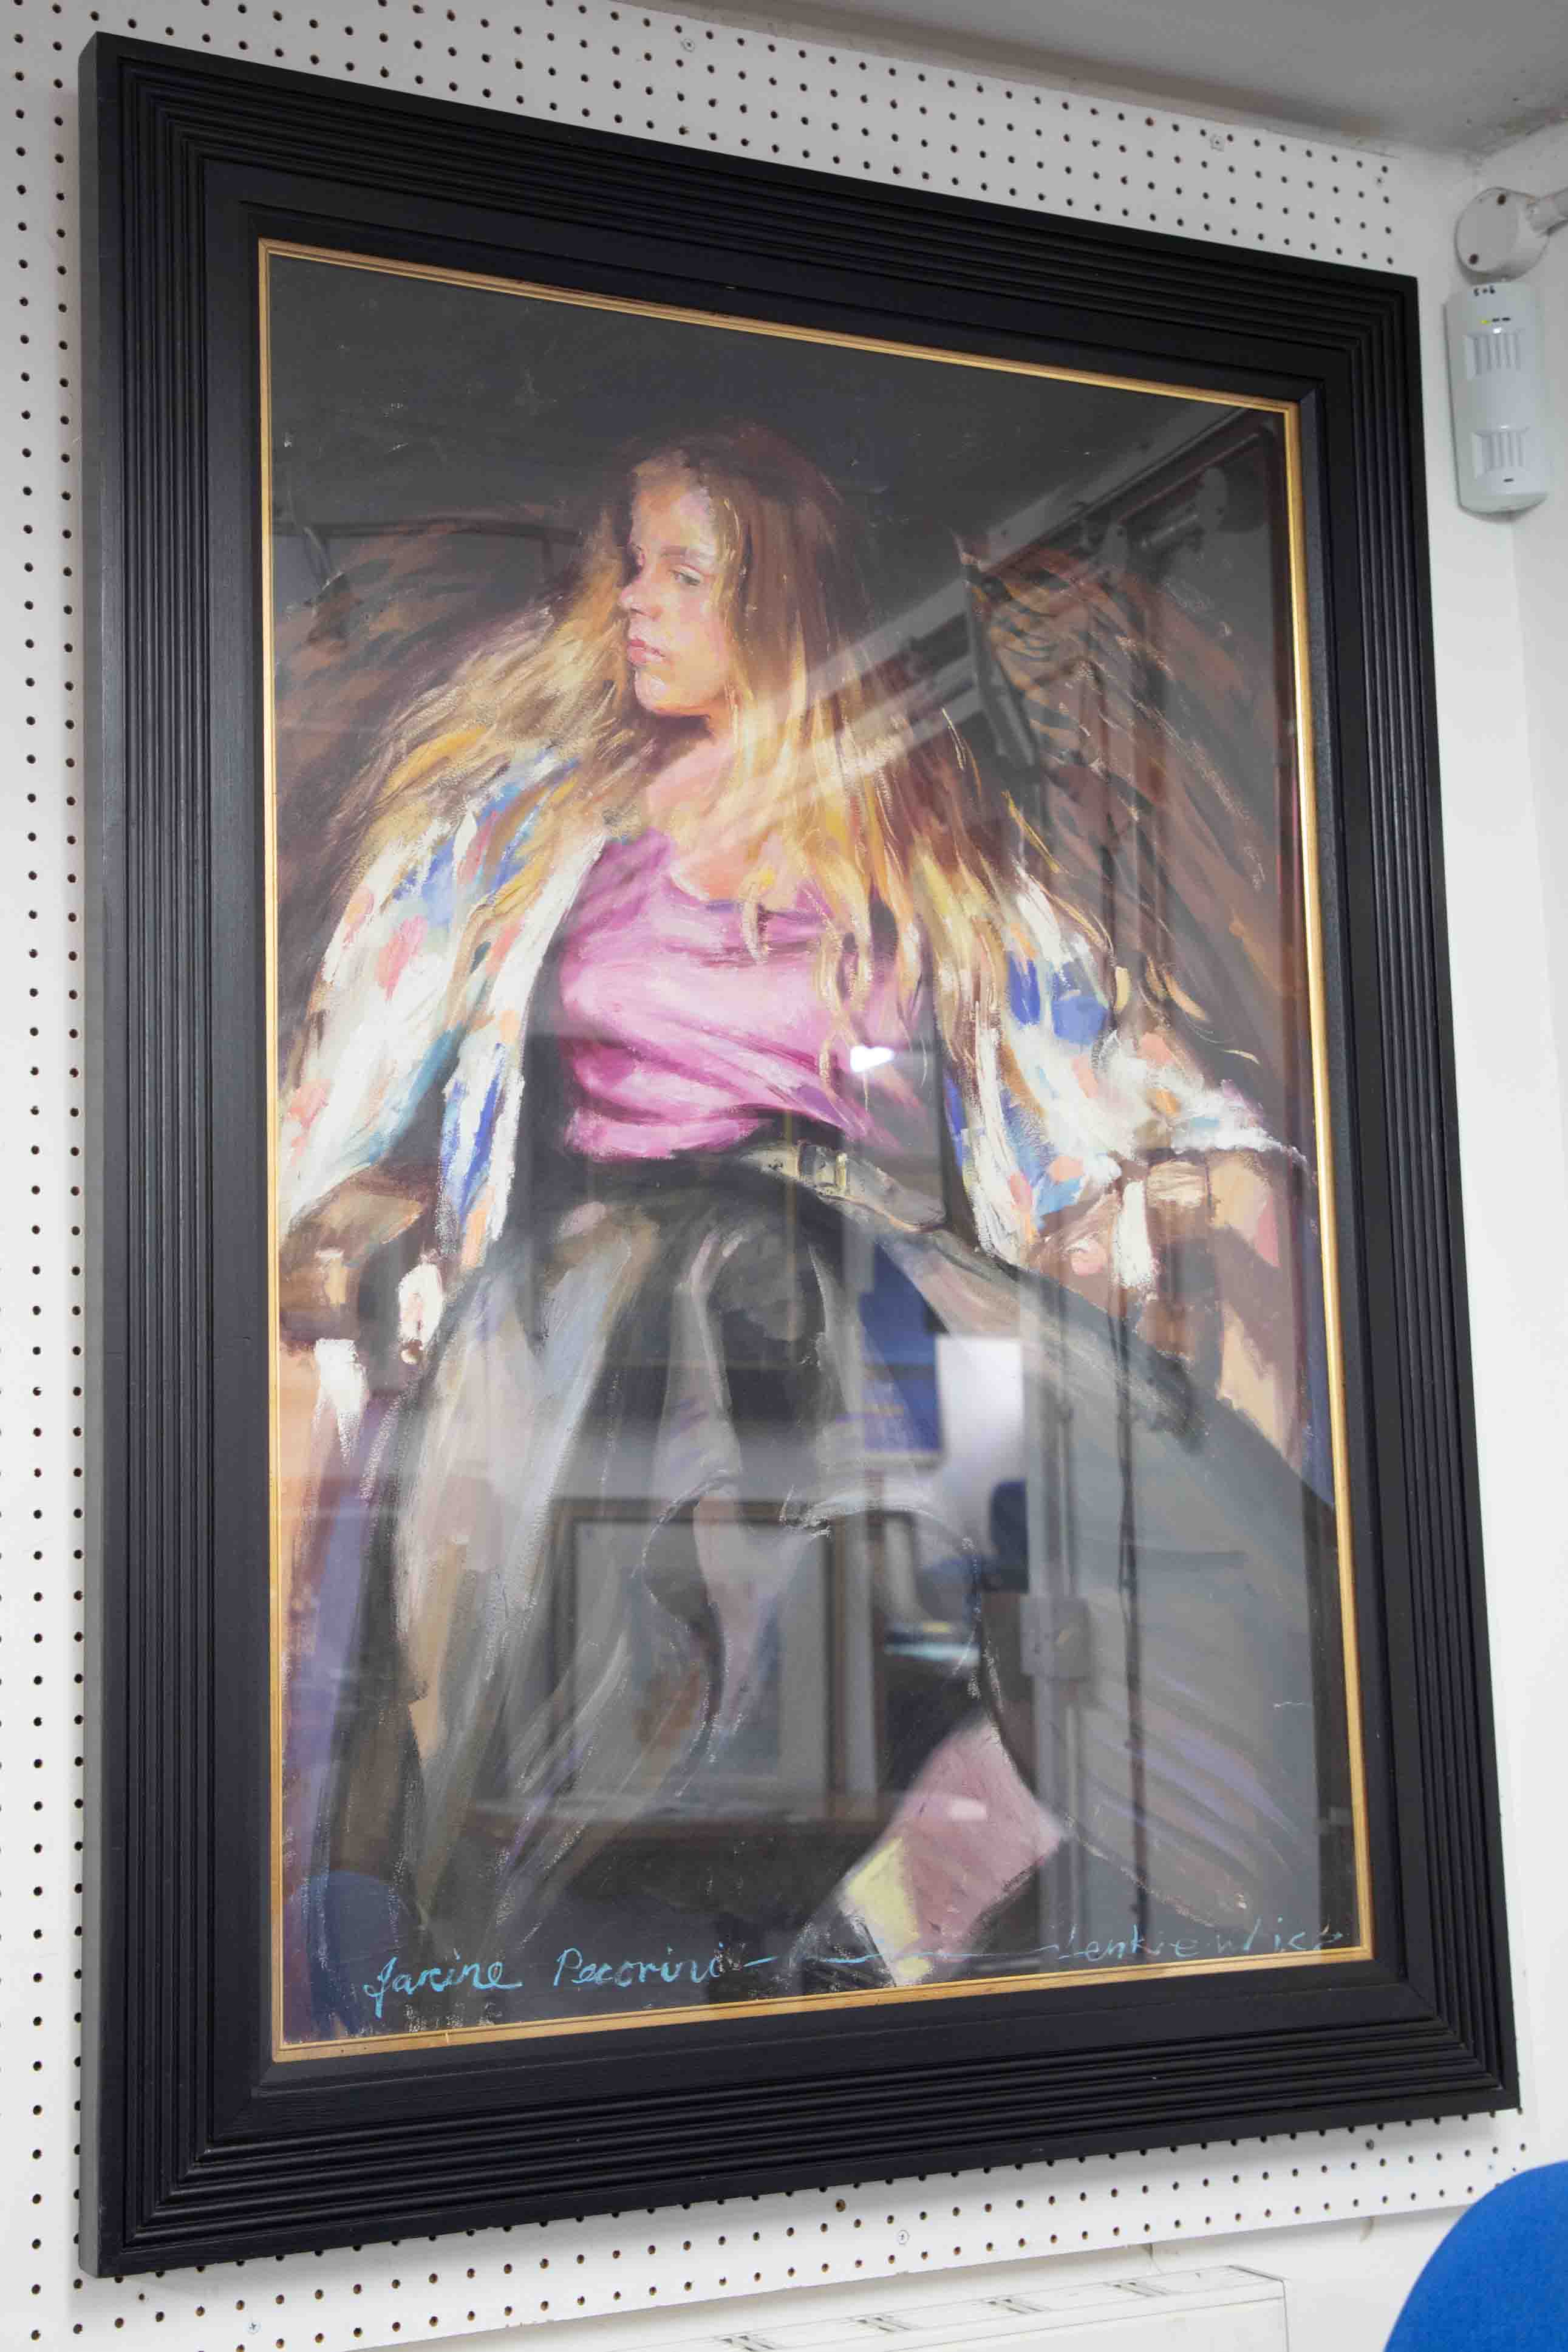 Robert Lenkiewicz (1941-2002), 'Study of Janine Pecorini', signed by painter and sitter along the - Image 2 of 2